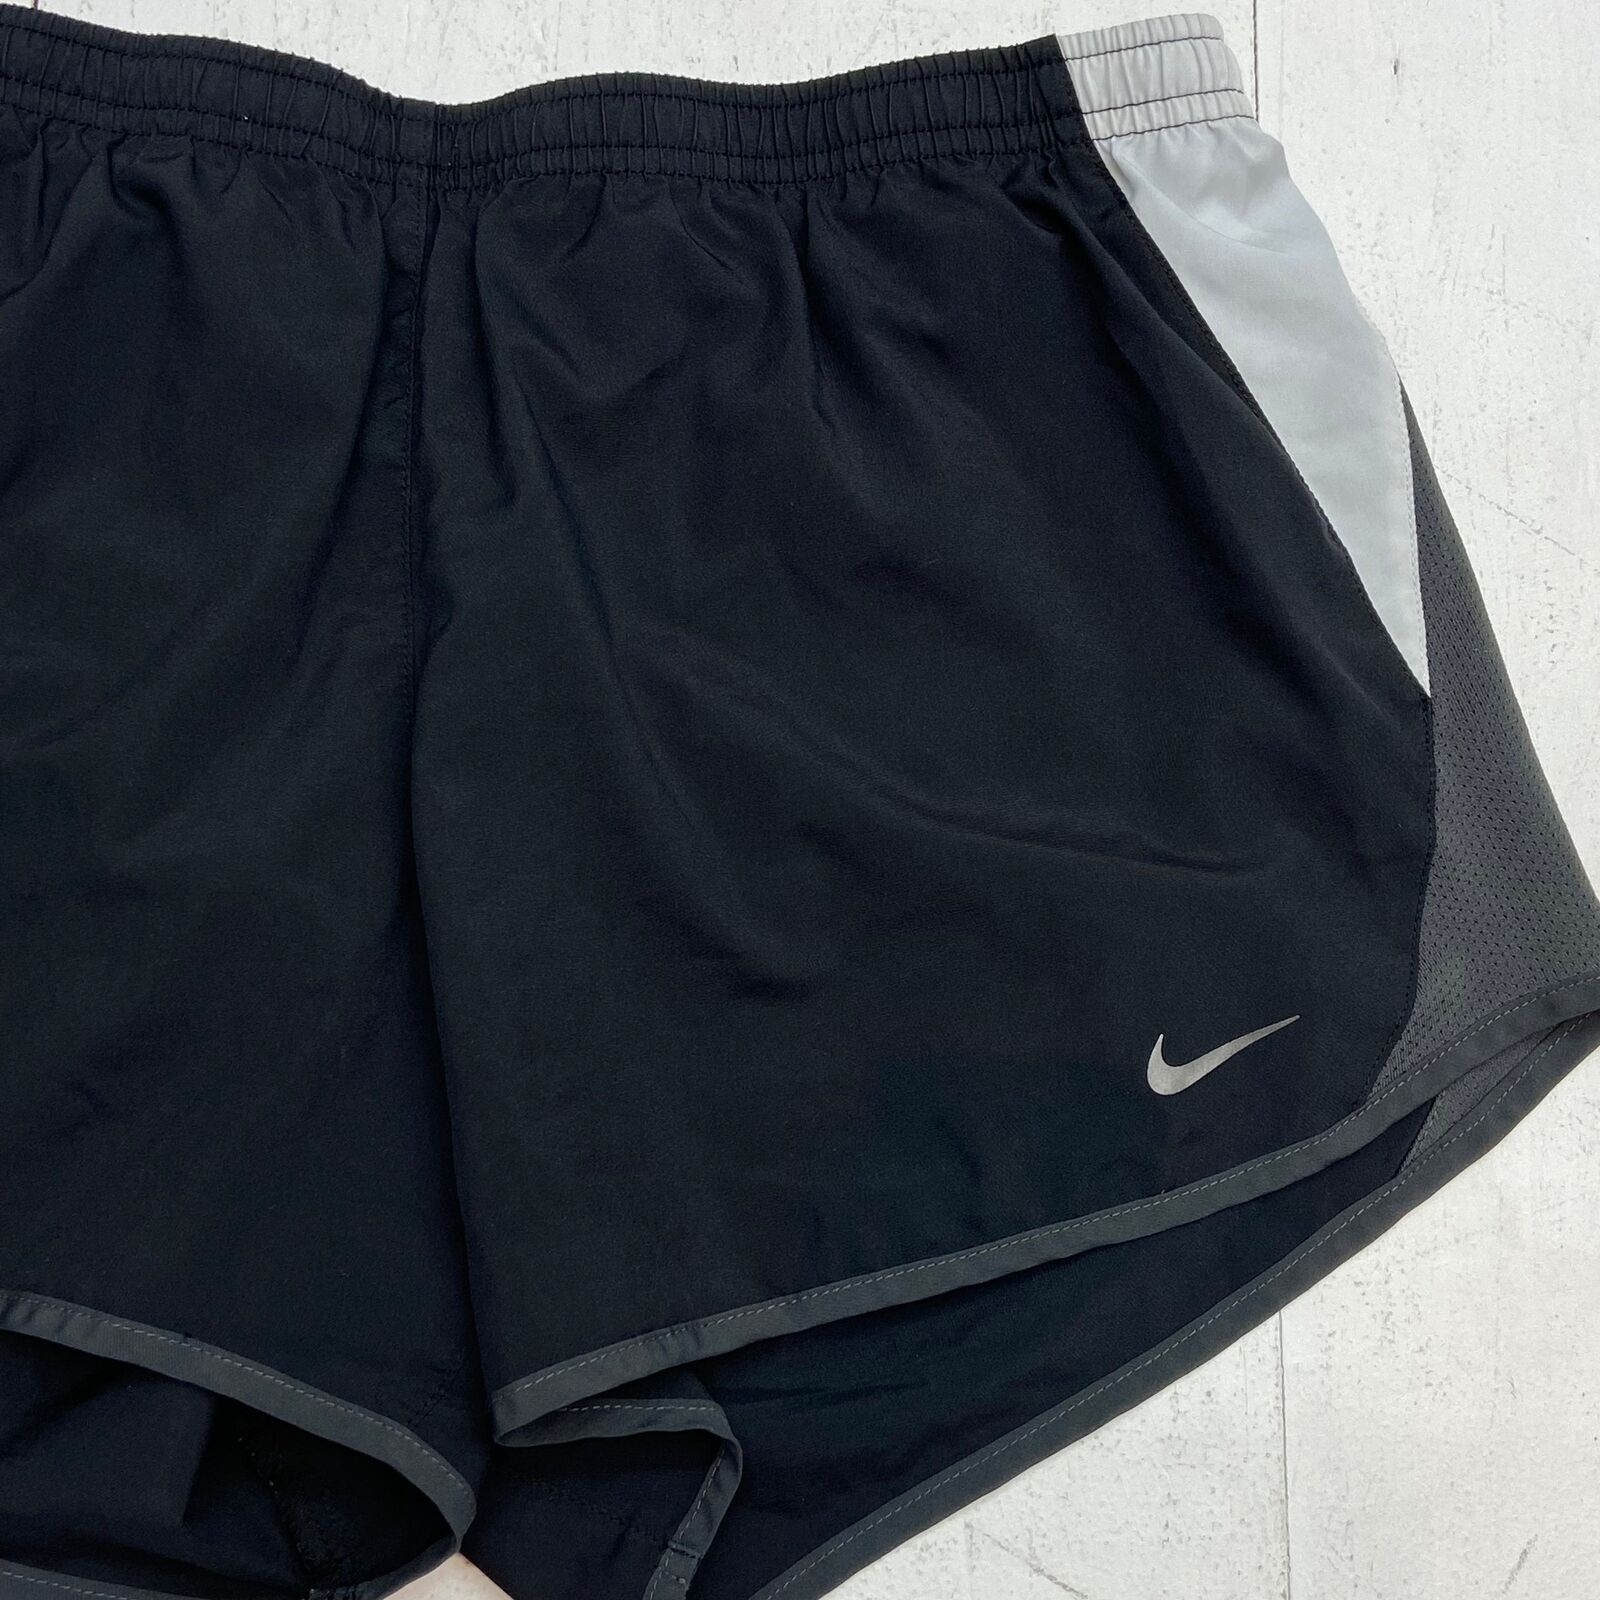 Nike Dri Fit Black Running Shorts with Liner Women Size M - beyond